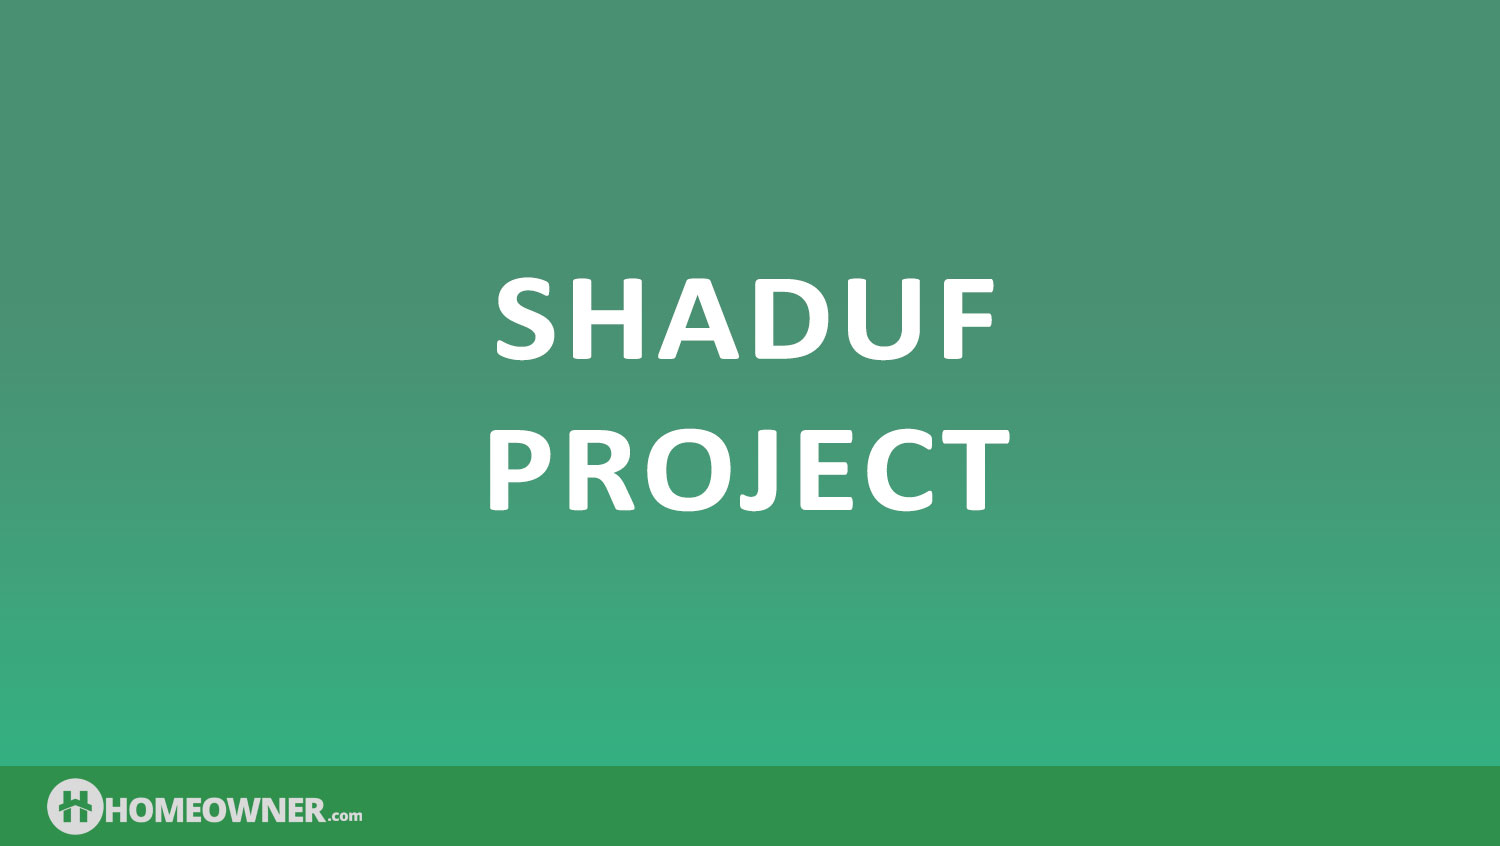 What Is the Shaduf Project?